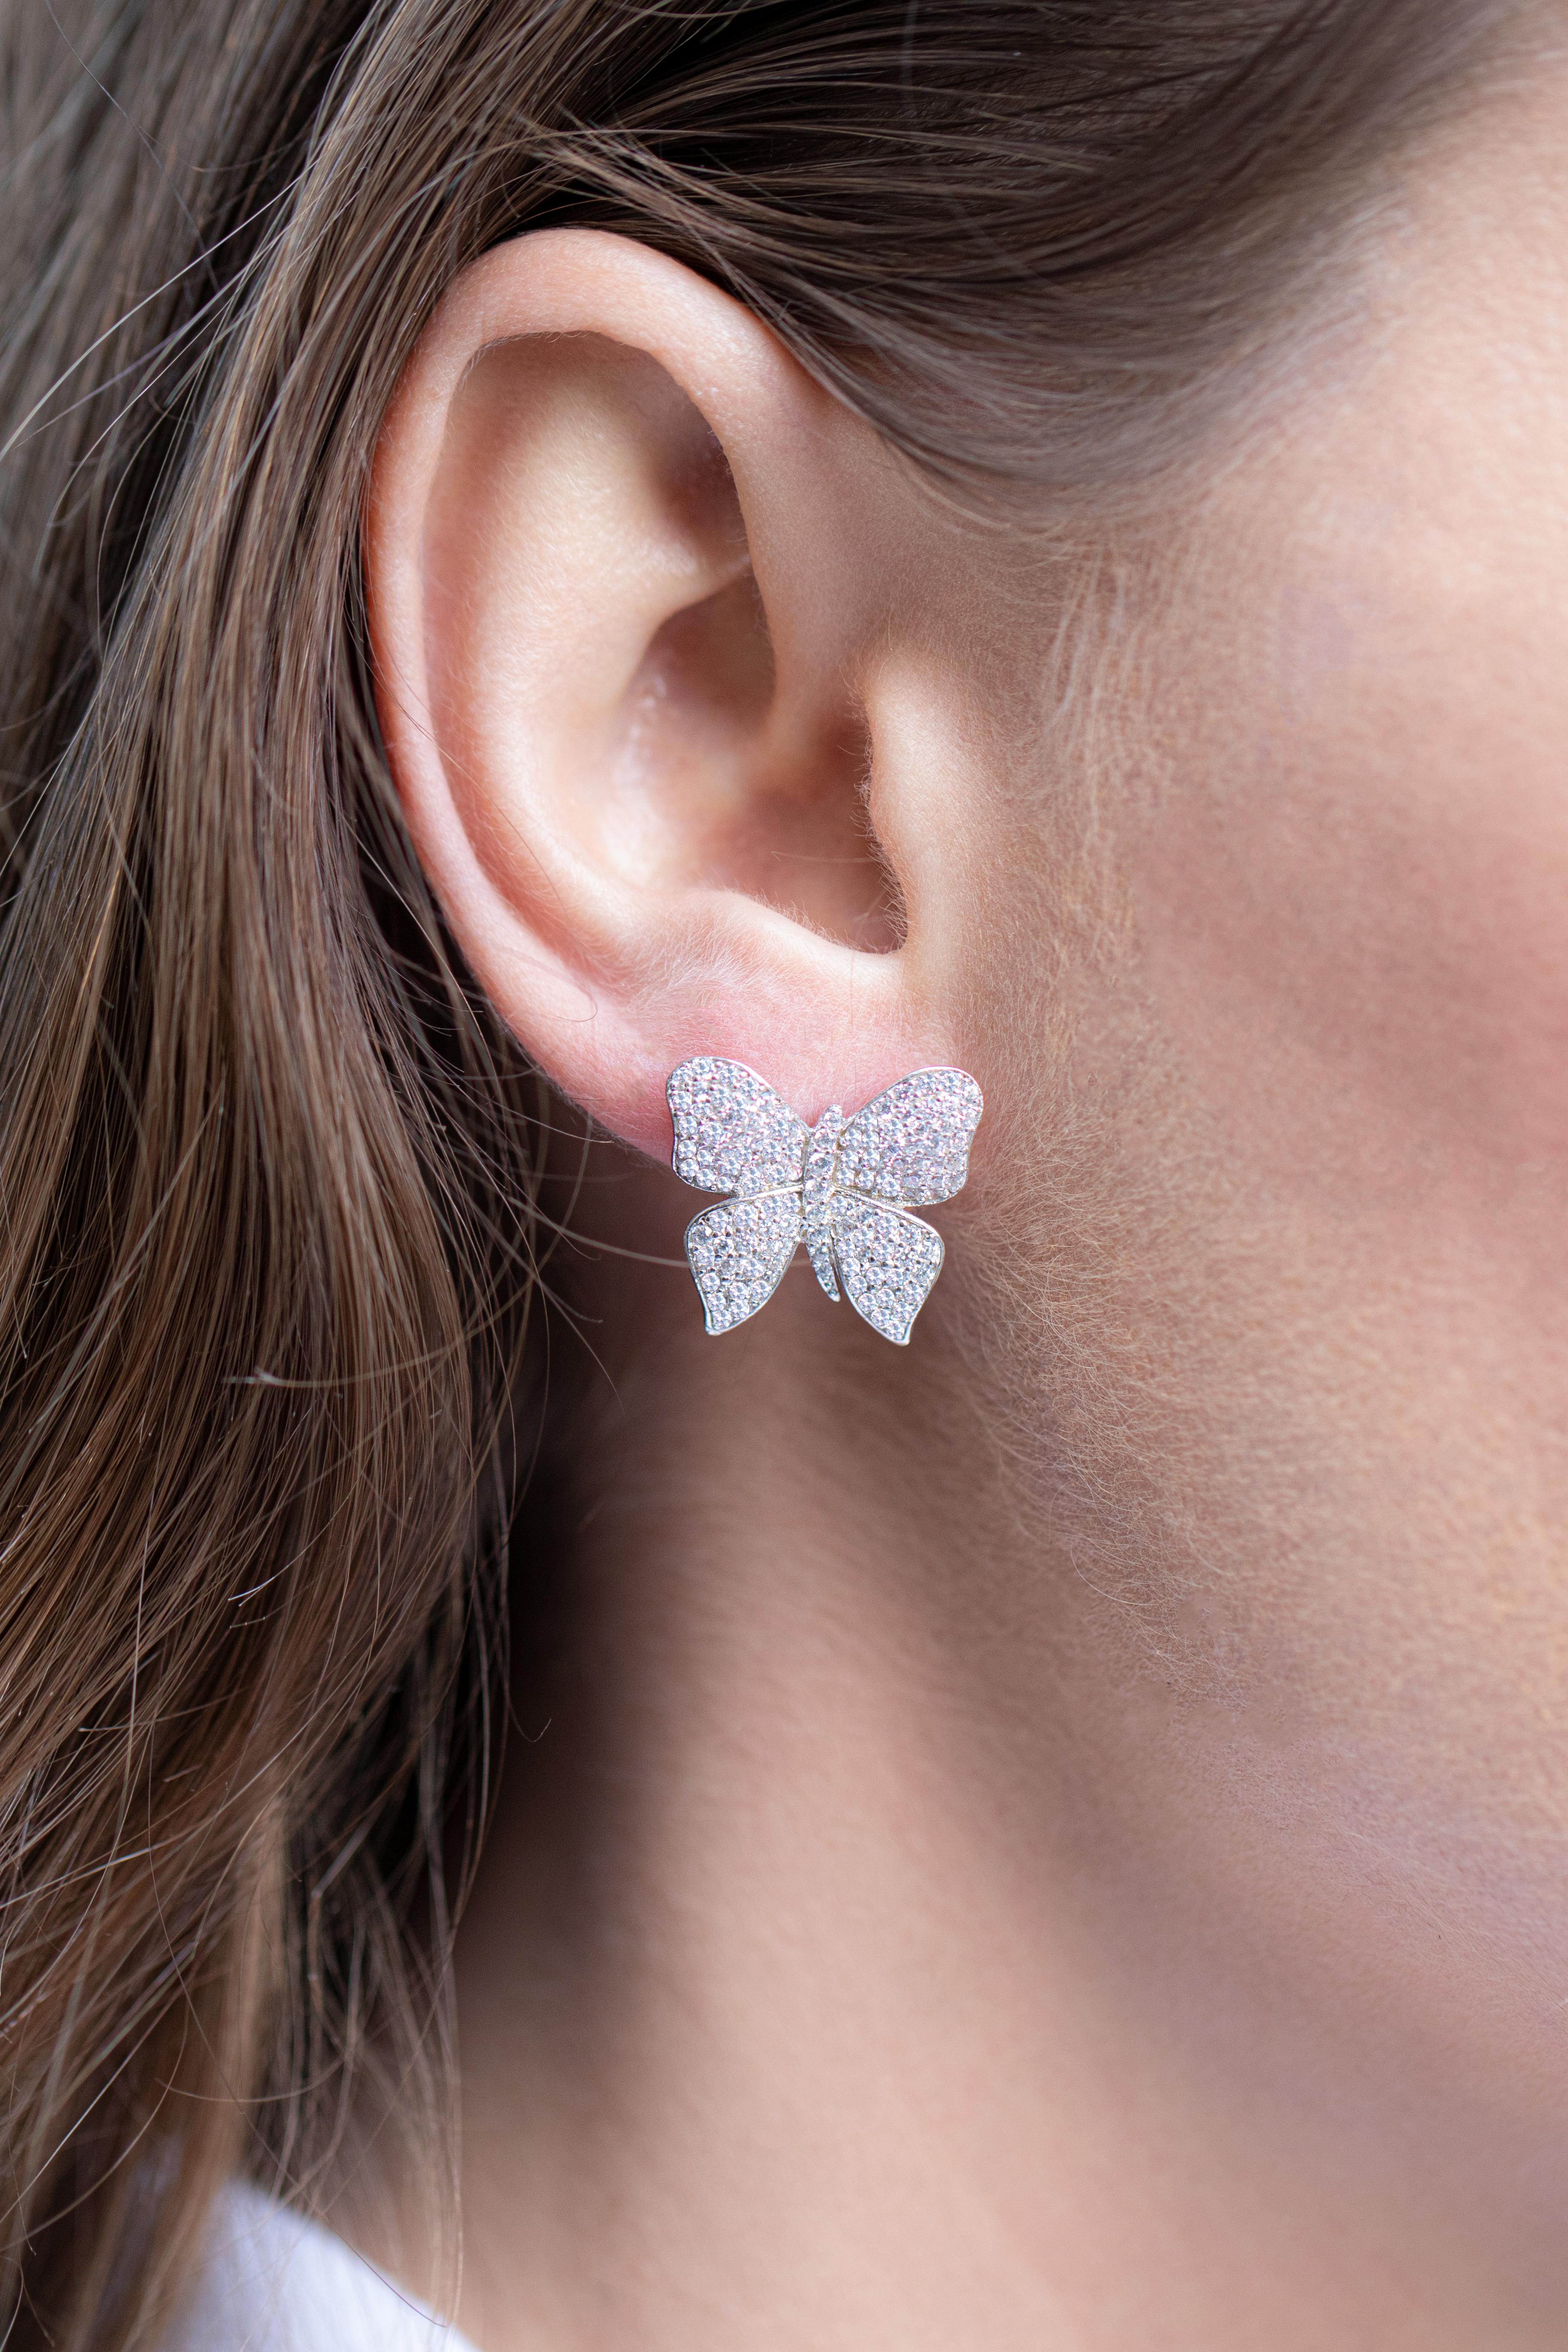 Butterfly Earrings 
Gemstone: Very Fine Cubic Zirconia
Metal: Rhodium Finish Sterling
Style: French